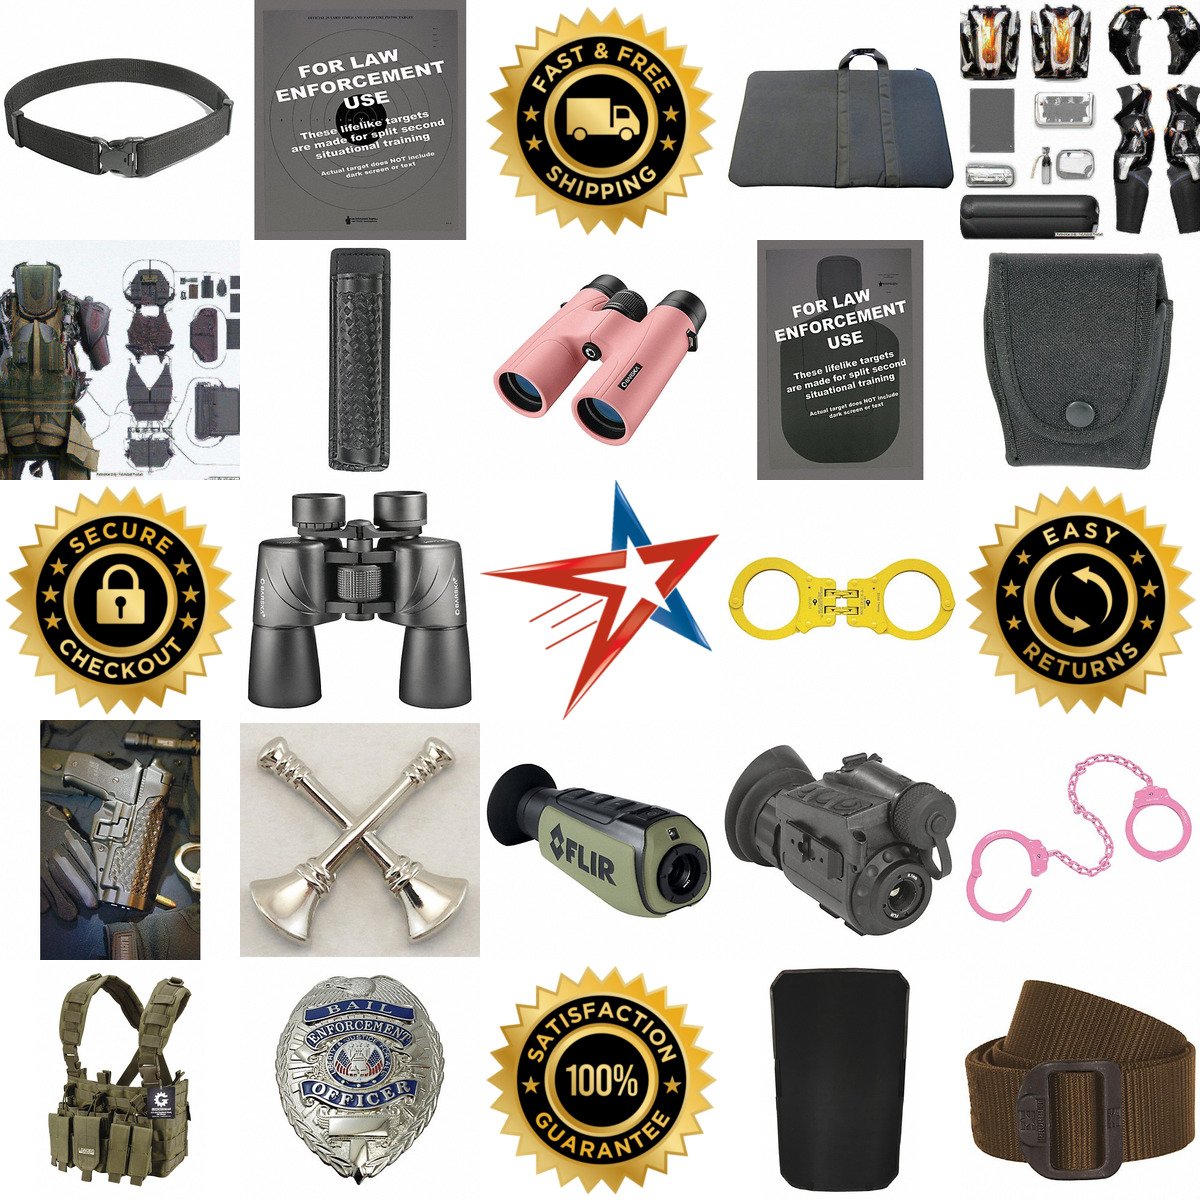 A selection of Security Management and Law Enforcement products on GoVets